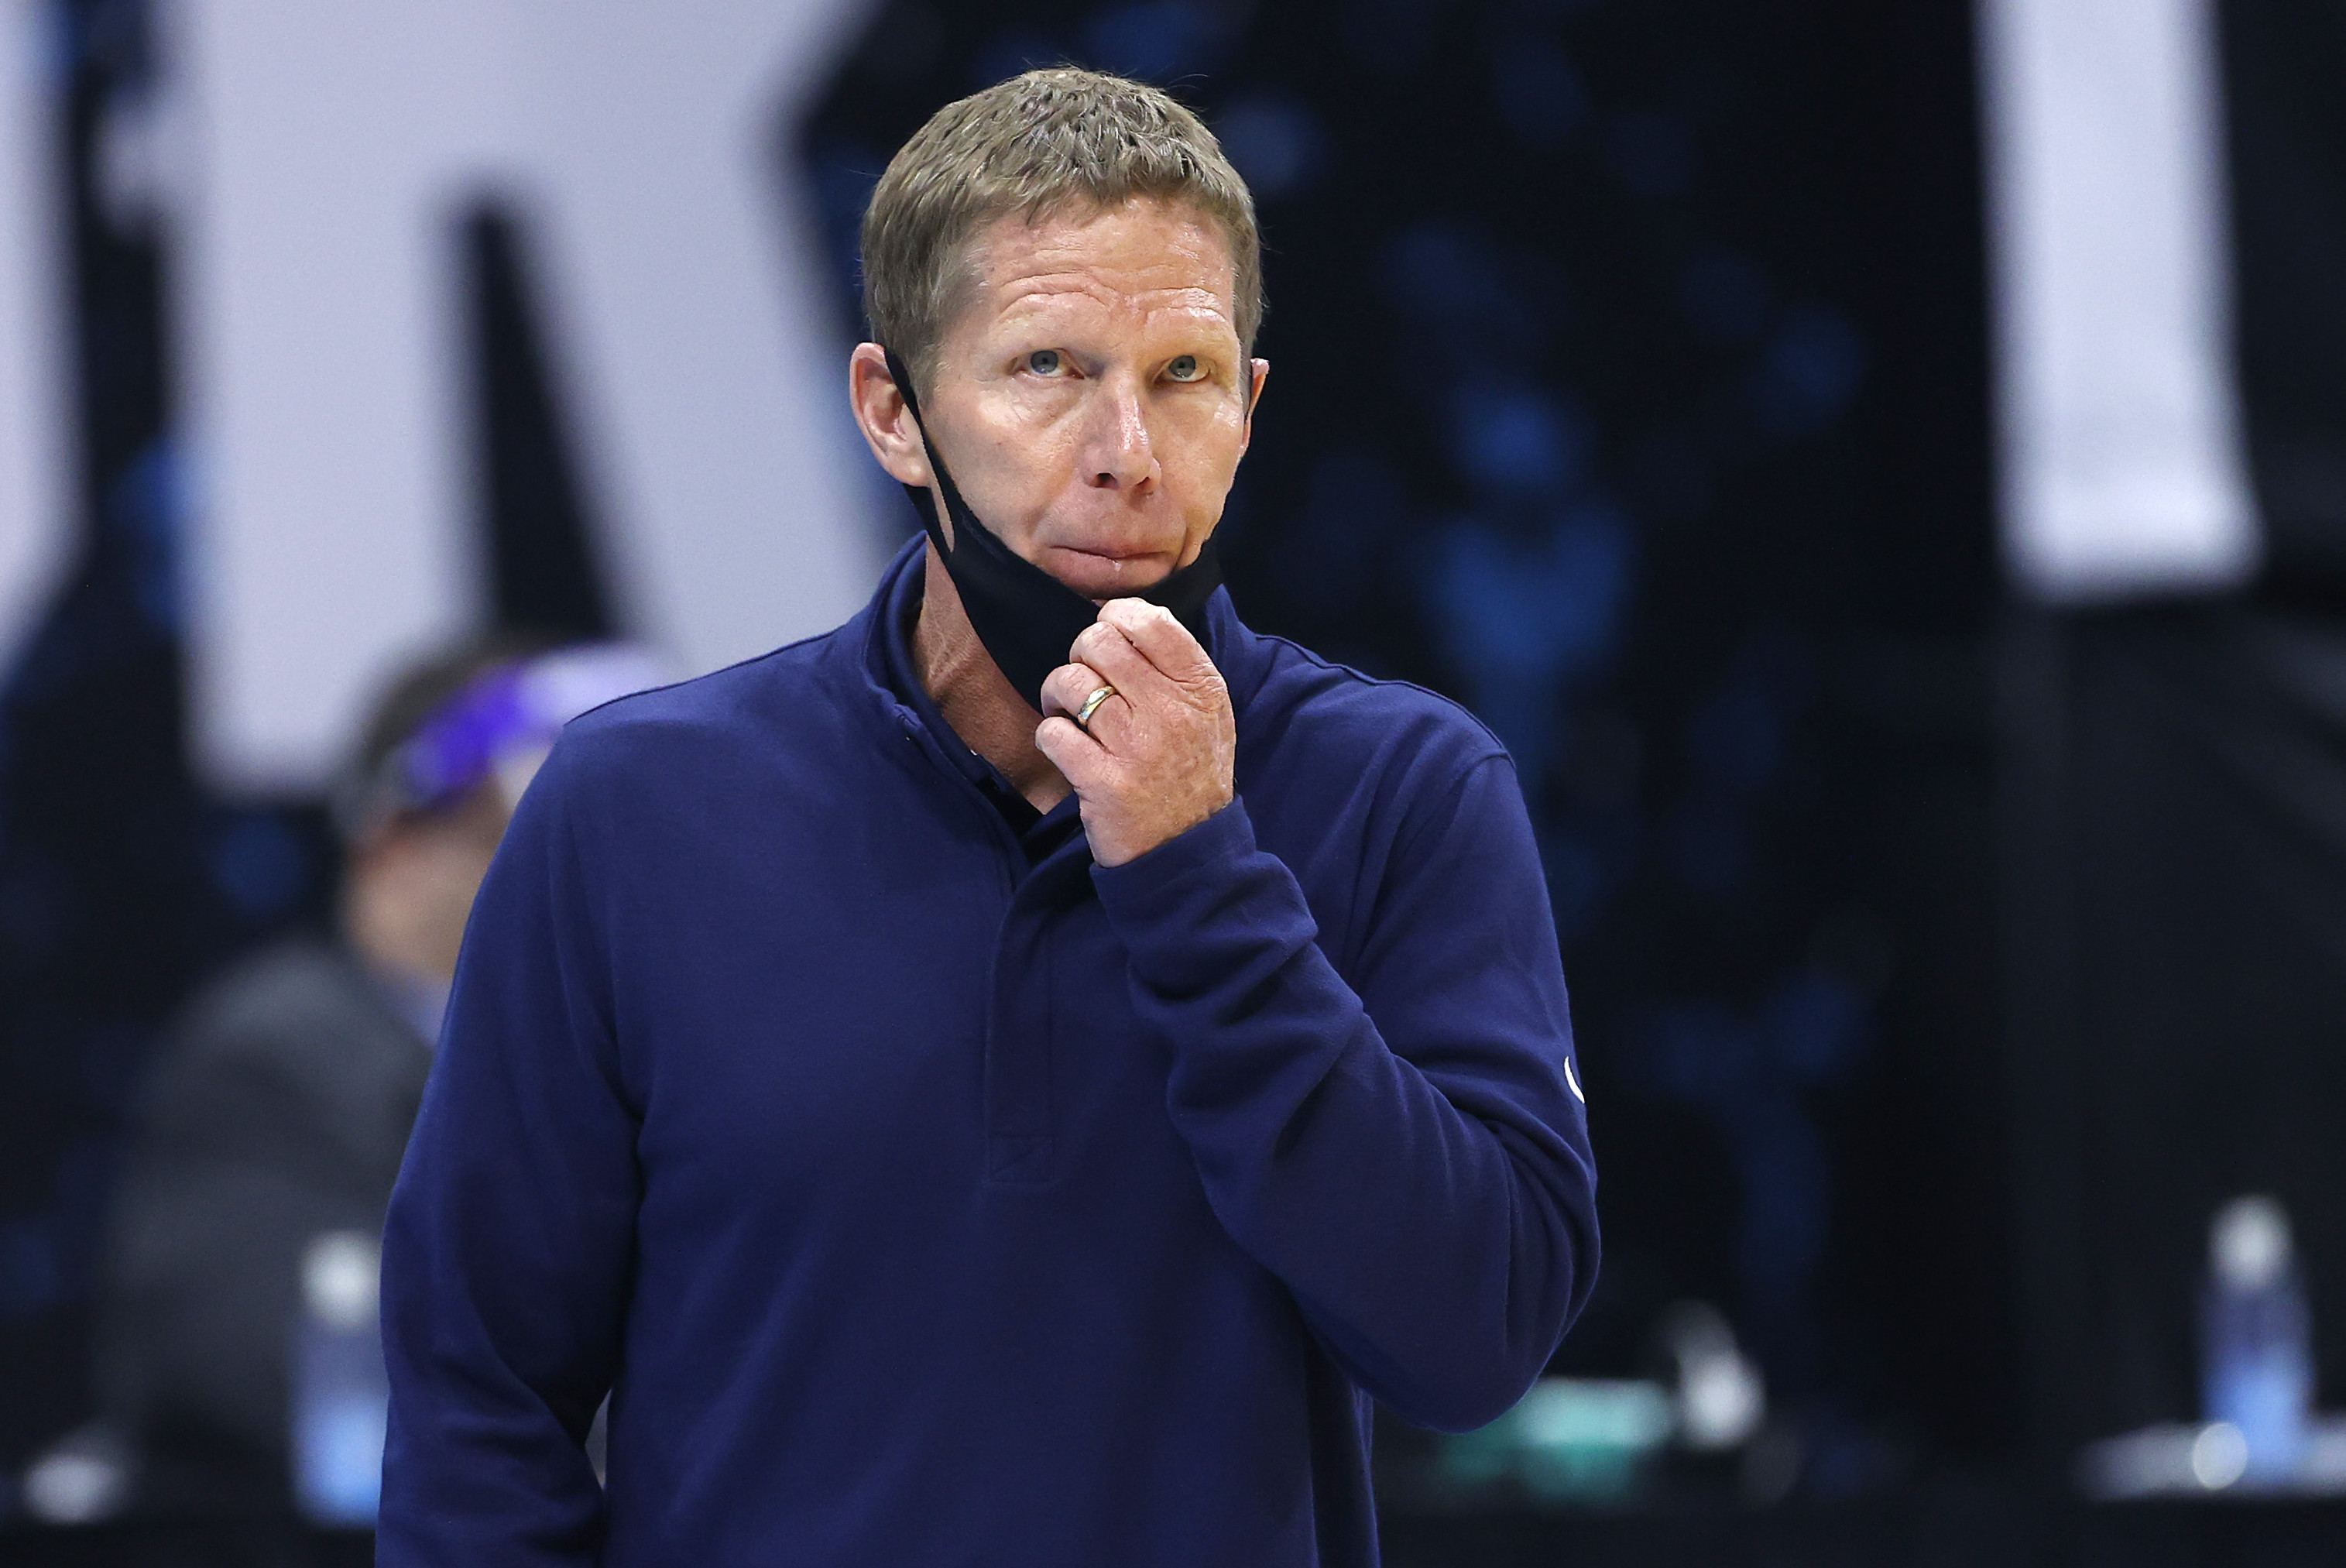 Gonzaga coach Mark Few reportedly faces DUI charge